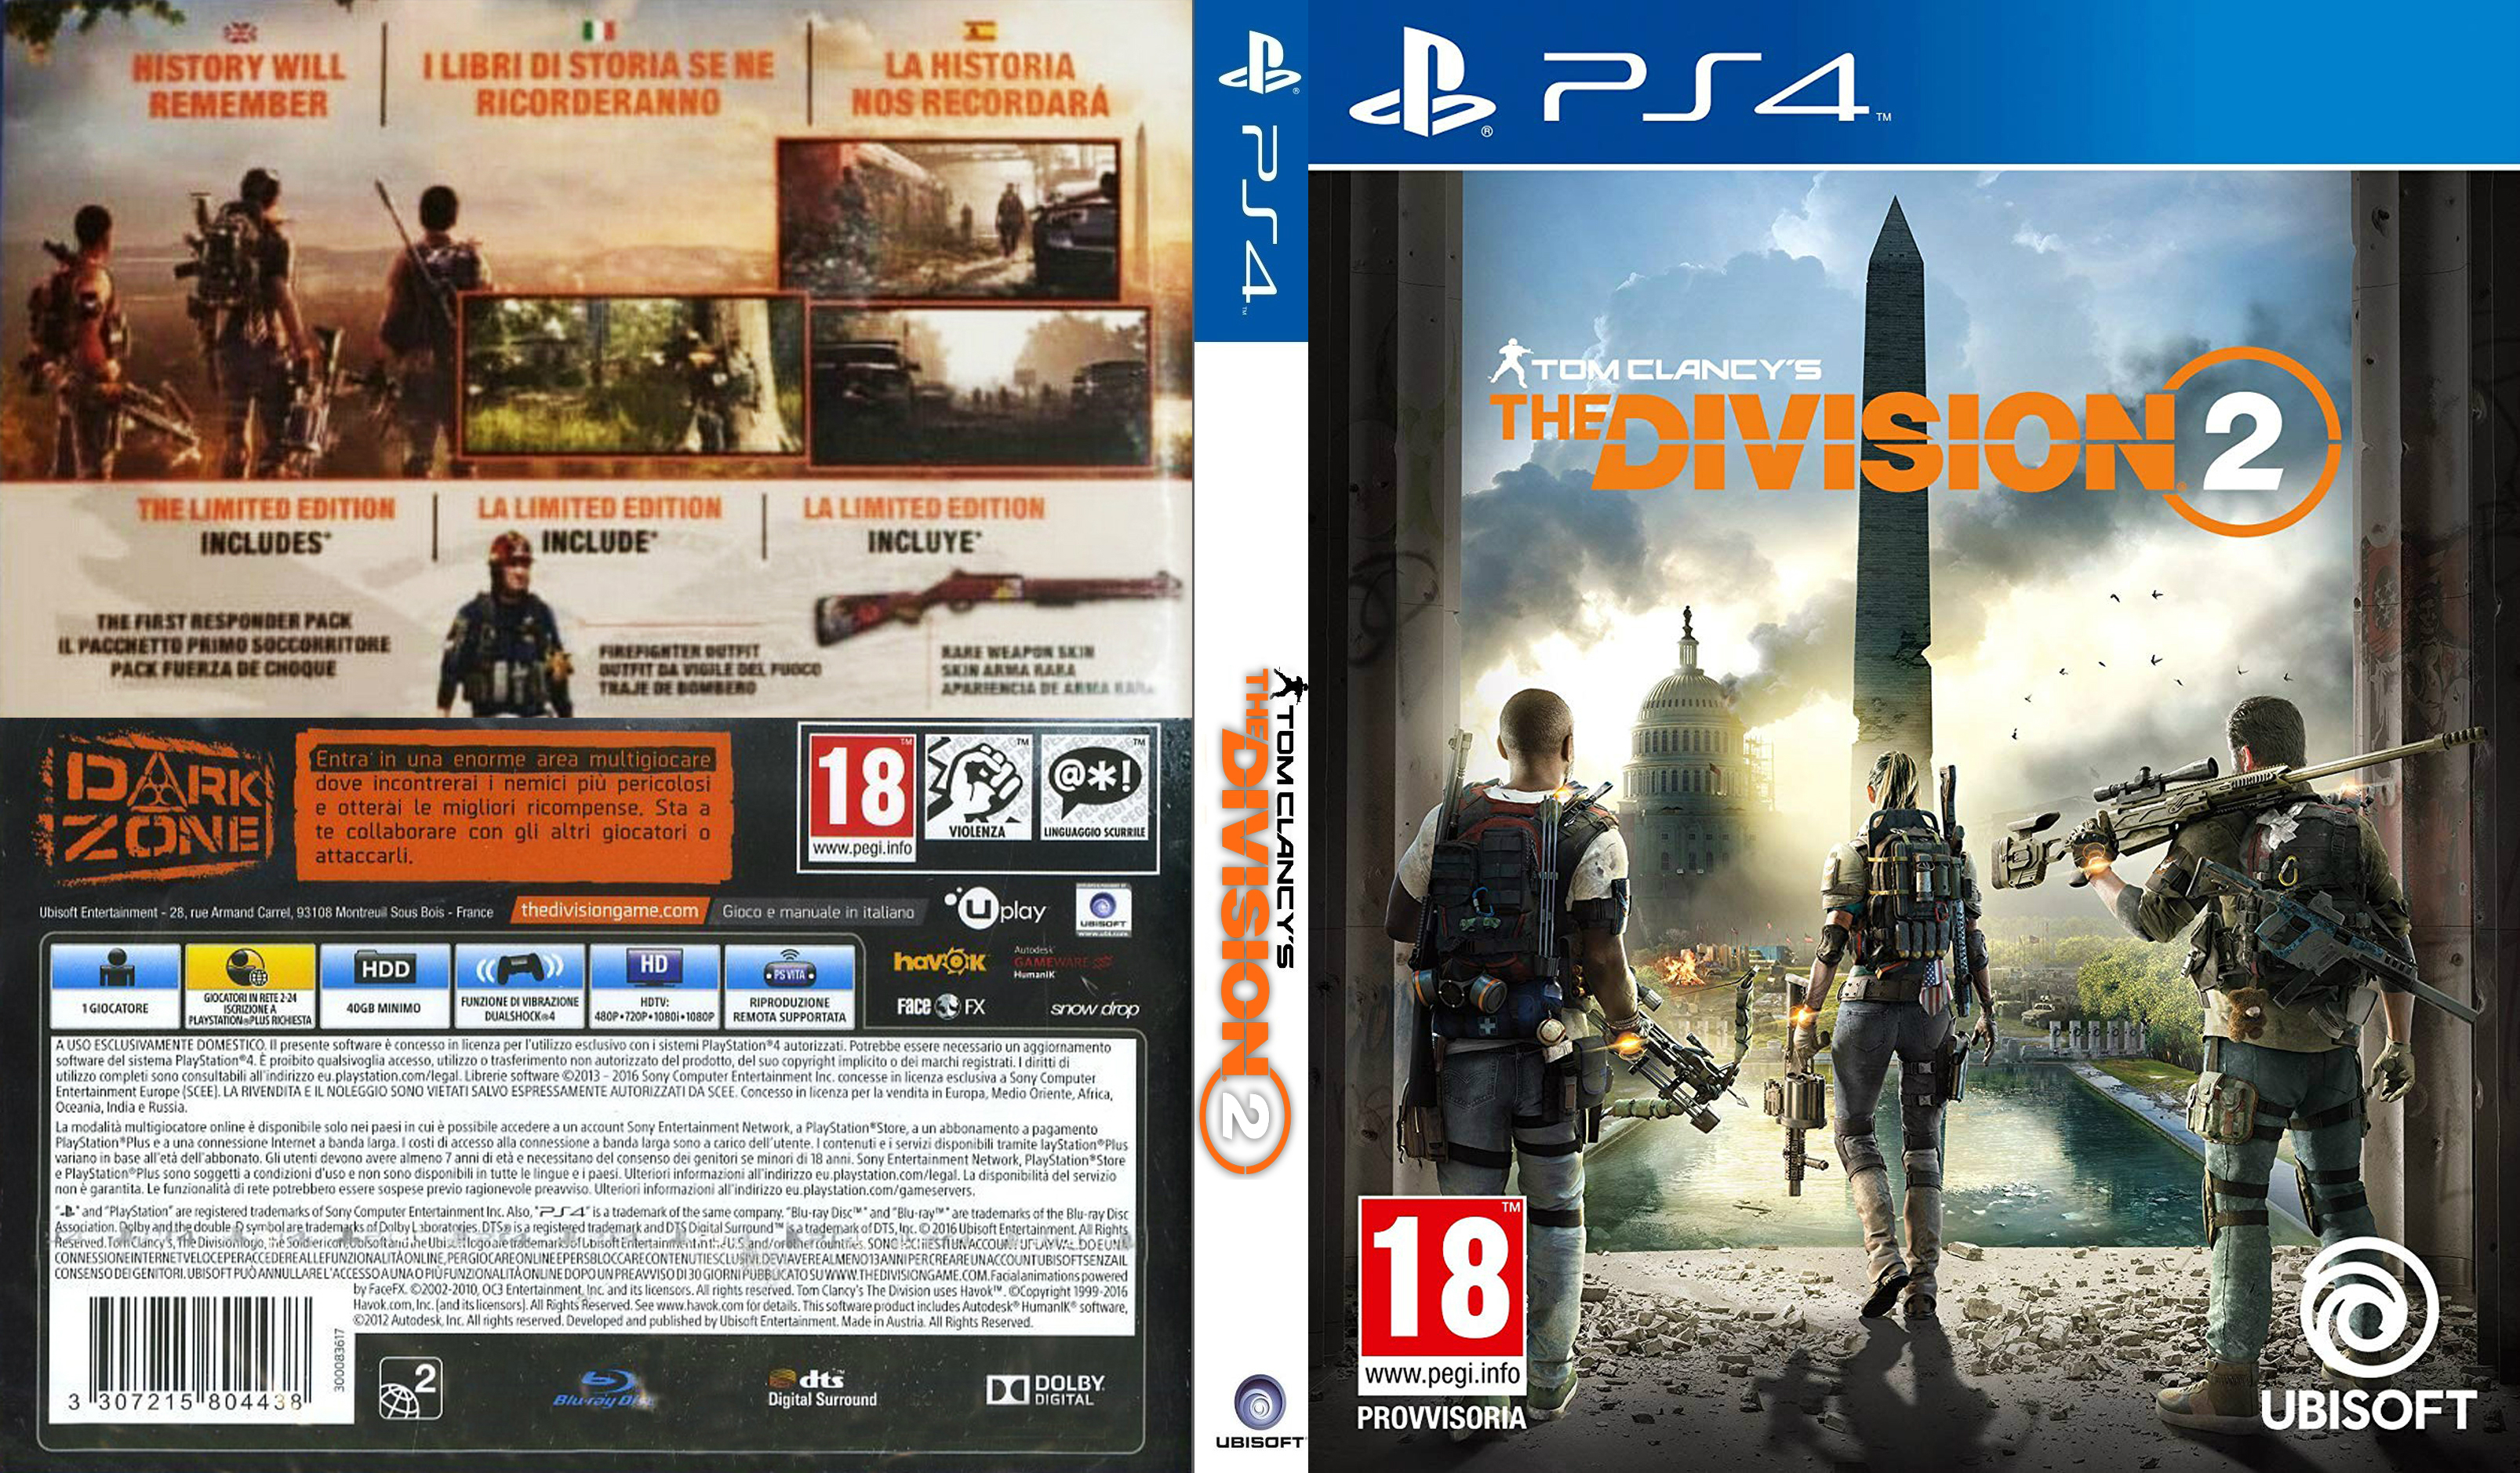 The division ps4. Дивизион 2 на пс4. Том Клэнси дивизион 2 на ПС 4. Tom Clancy's the Division 2 диск. Tom Clancy's the Division 2 ps4 обложка.